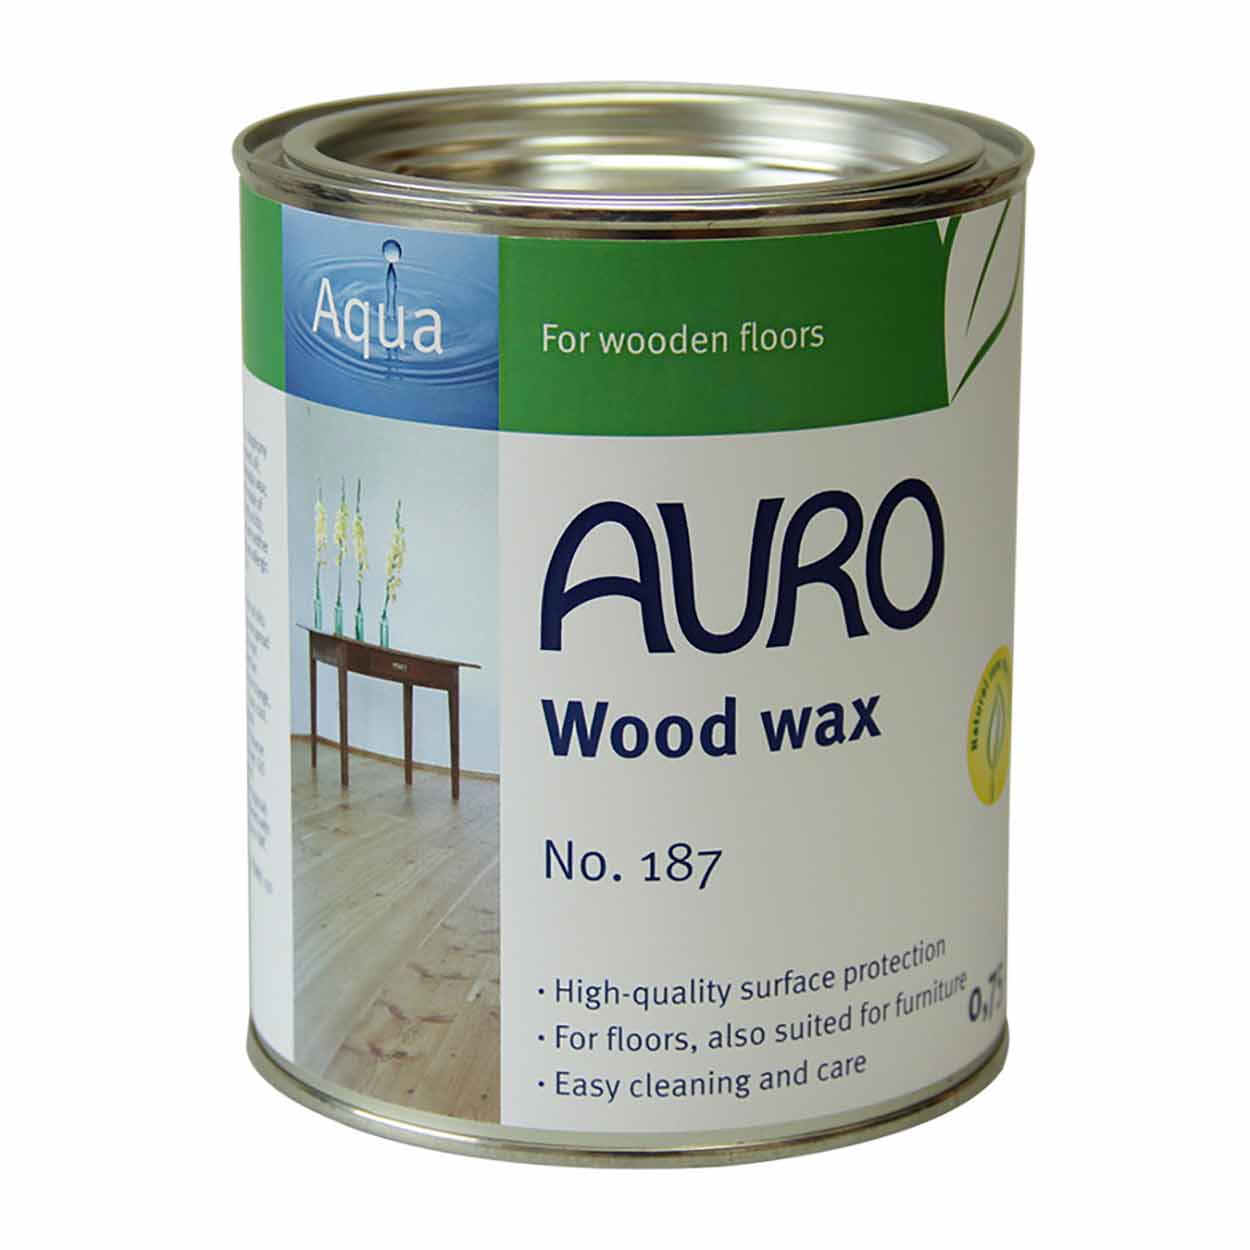 Natural Wood Wax For Wooden Floors - Water Based Non Toxic Auro 187